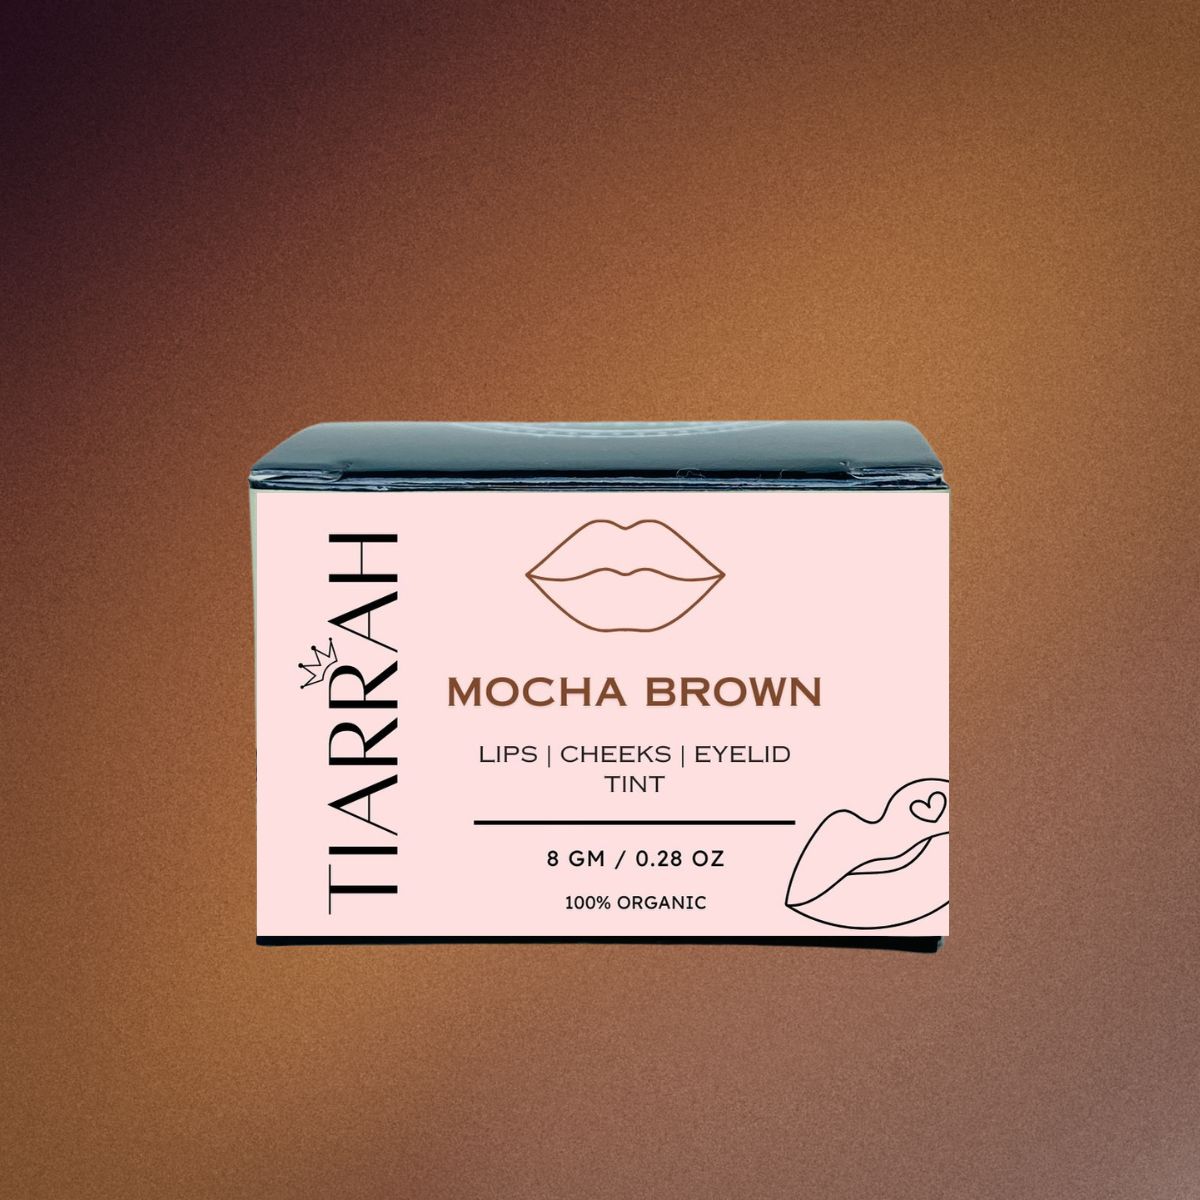 Luxury Mocha Brown Tint by Tiarrah: Organic, Non-Toxic - The Luxury Bath and Body Care Shop